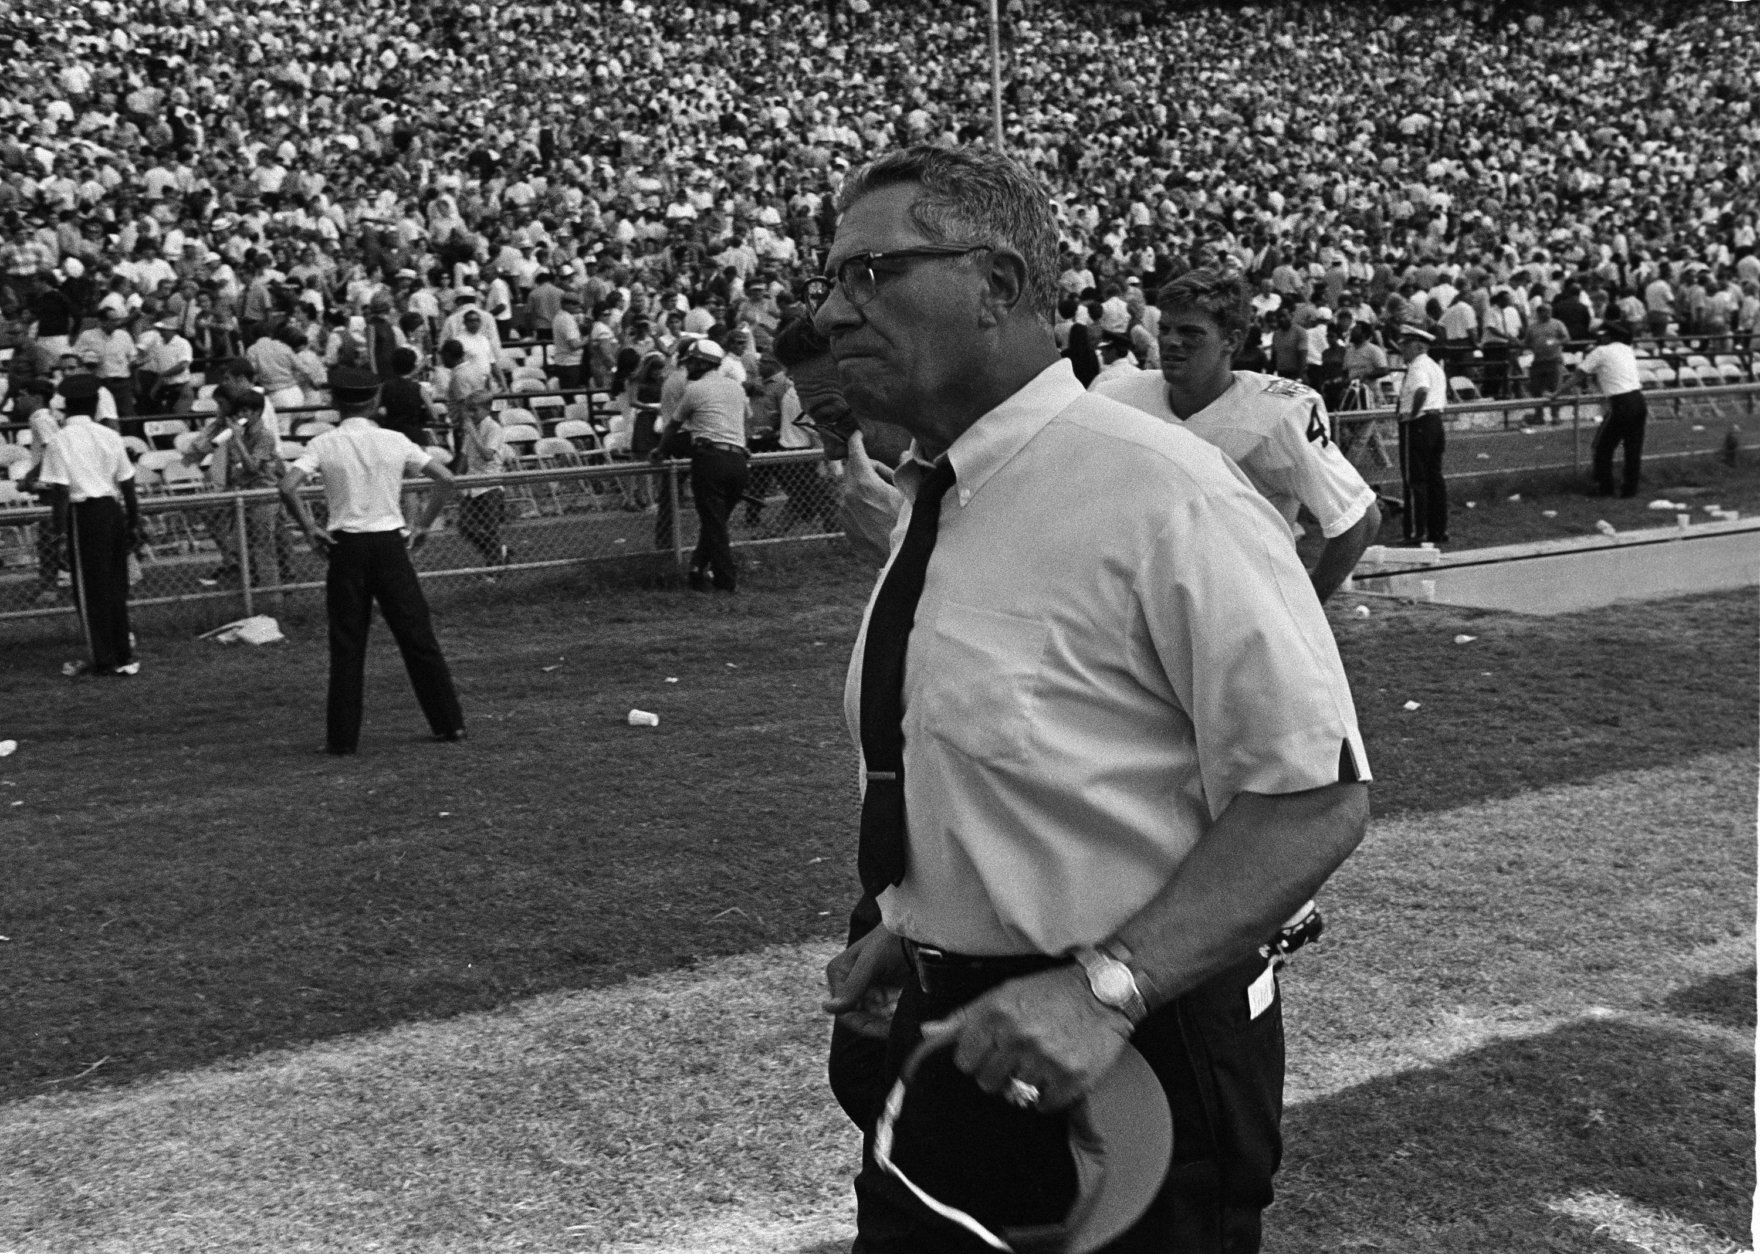 Washington Redskins head coach Vince Lombardi voices his opinion about a play from the sidelines where he made his regular season debut with the team in New Orleans, La., Sept. 21, 1969. Lombardi's expression later changed to a smile as the Redskins beat the New Orleans Saints 26-20. (AP Photo)